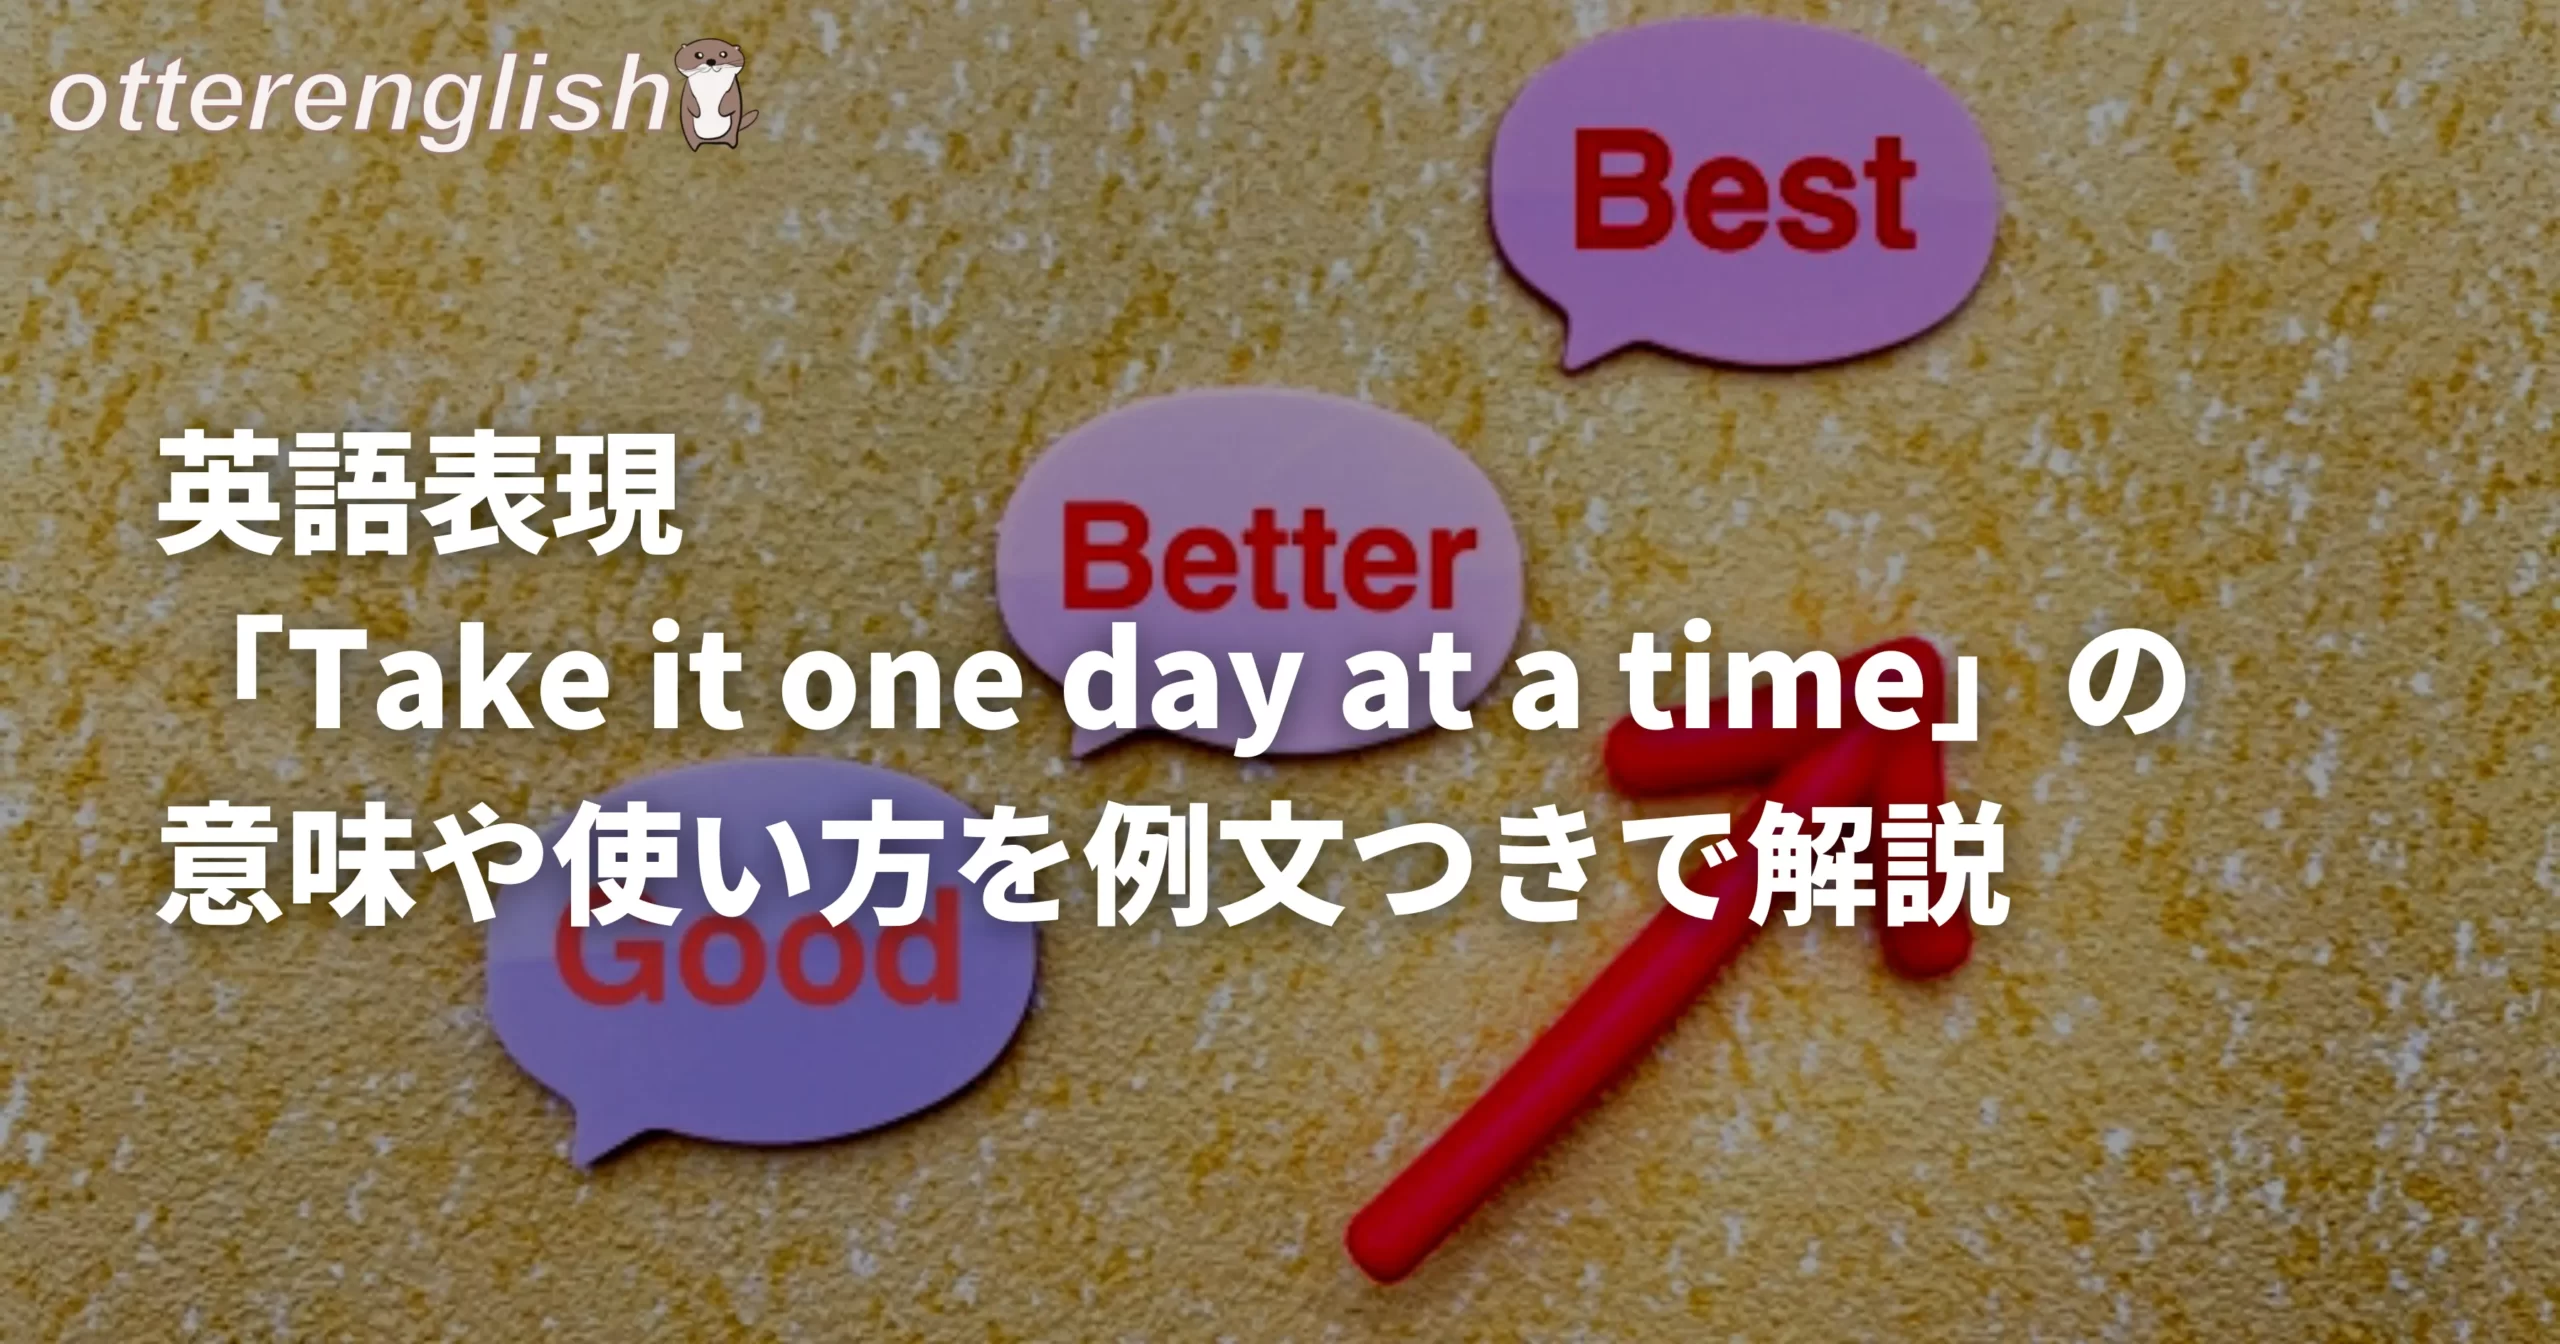 Take it one day at a timeを表した良くなっていく状態の図